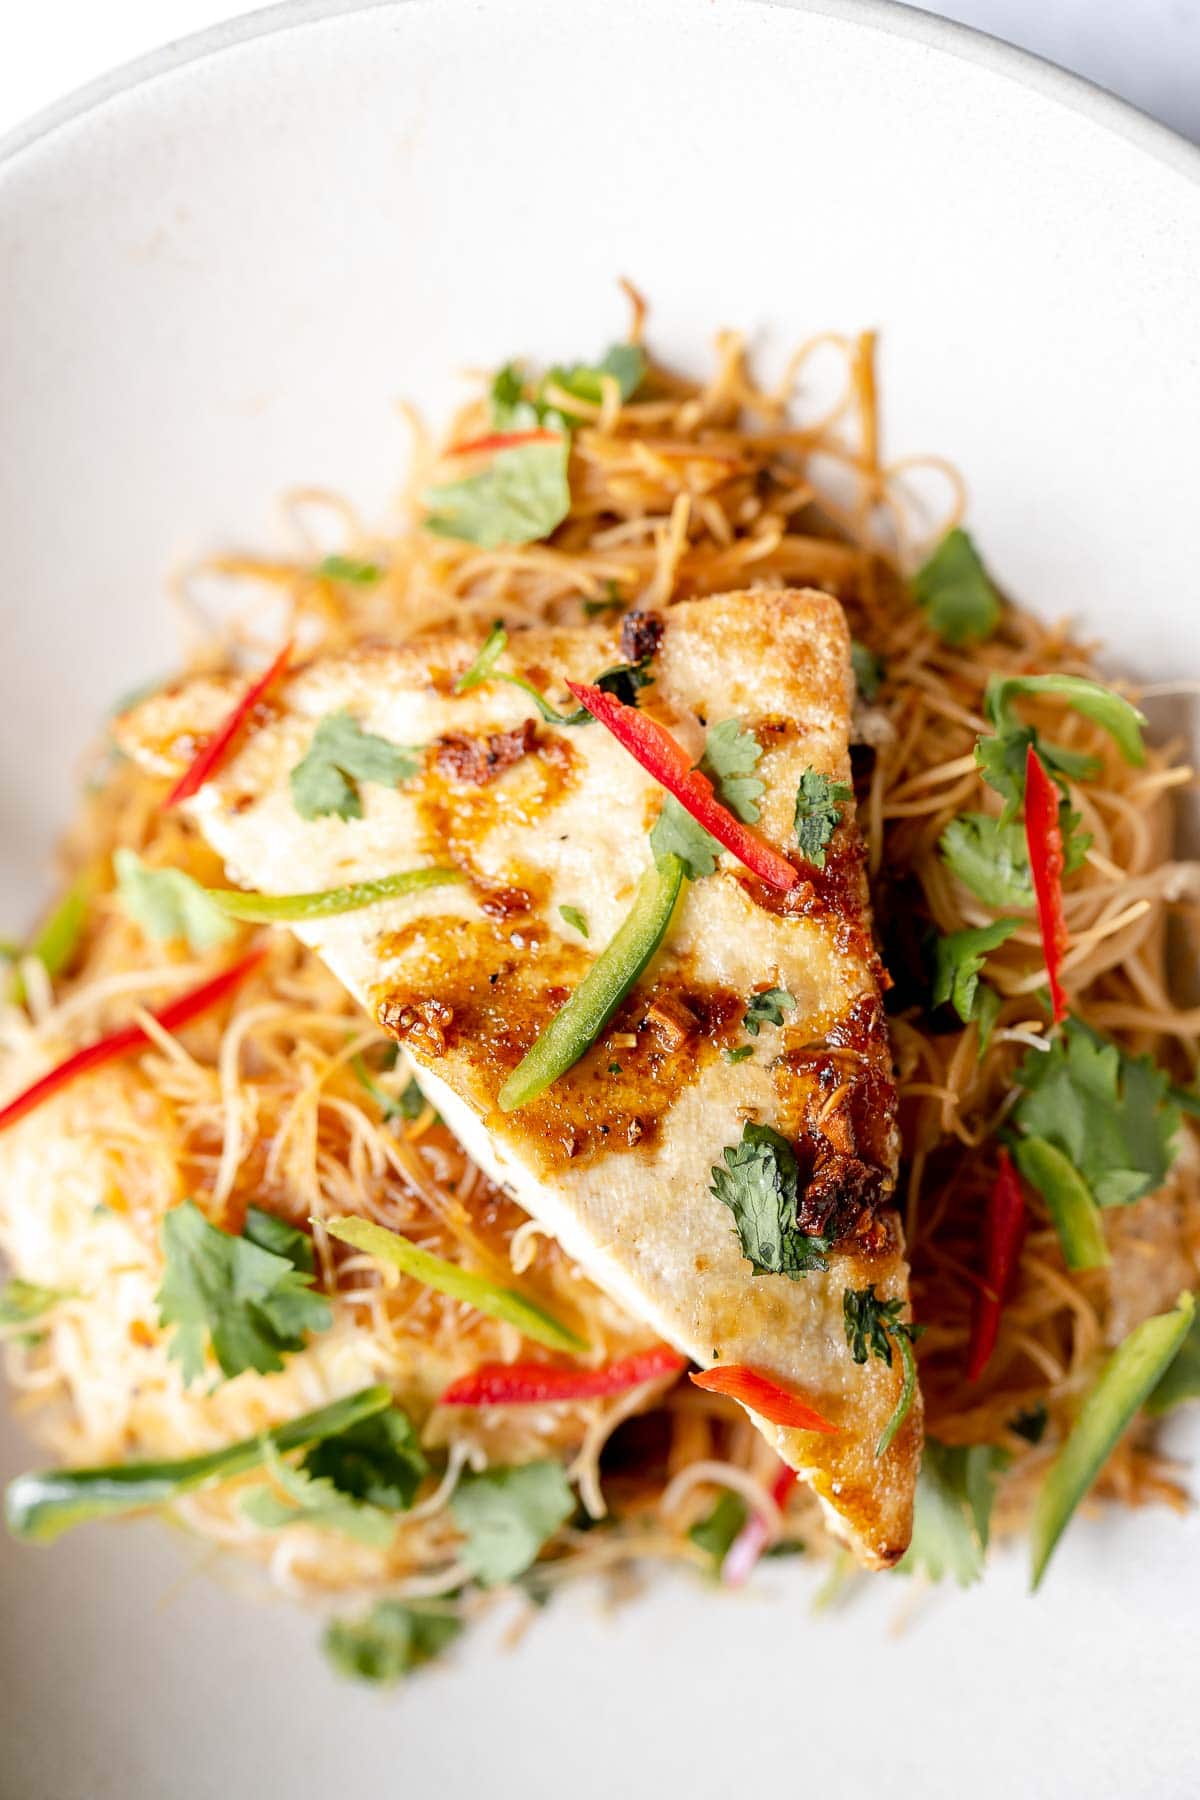 A close shot of a triangular slab of tofu resting on a bed of noodles.